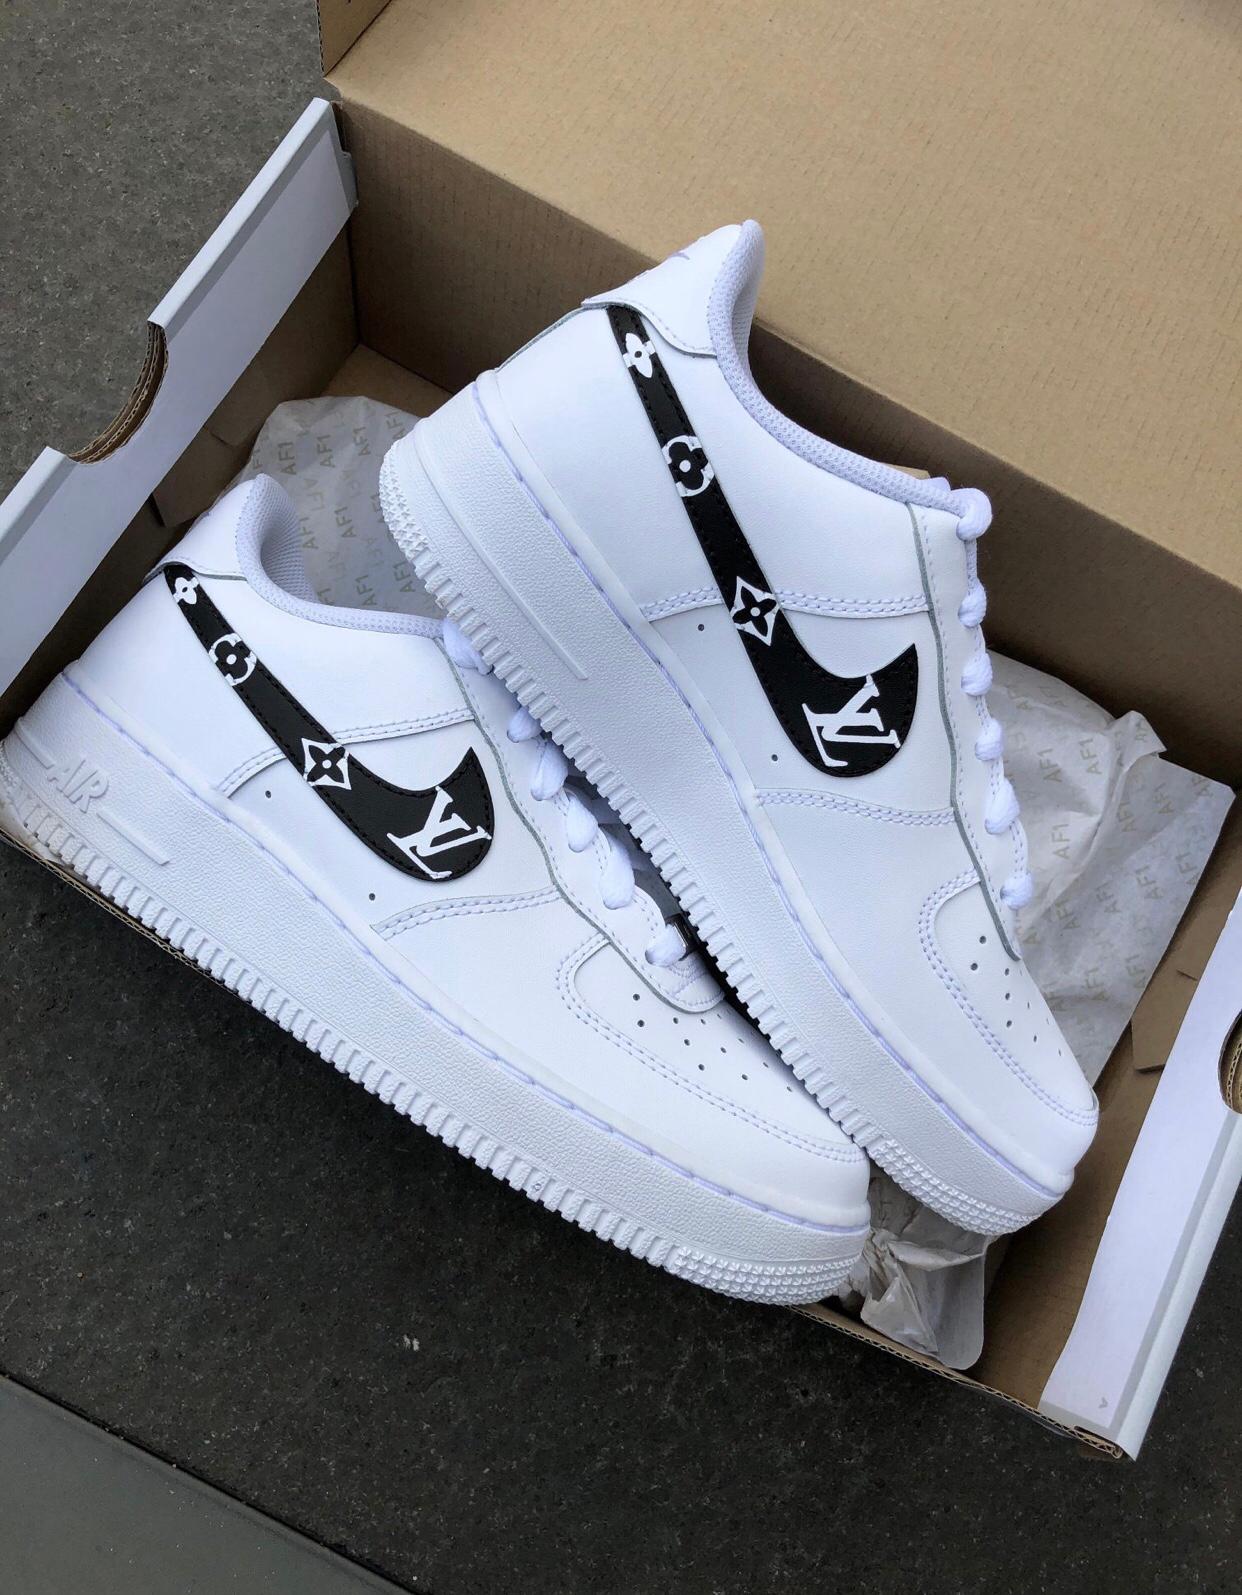 customised air forces uk